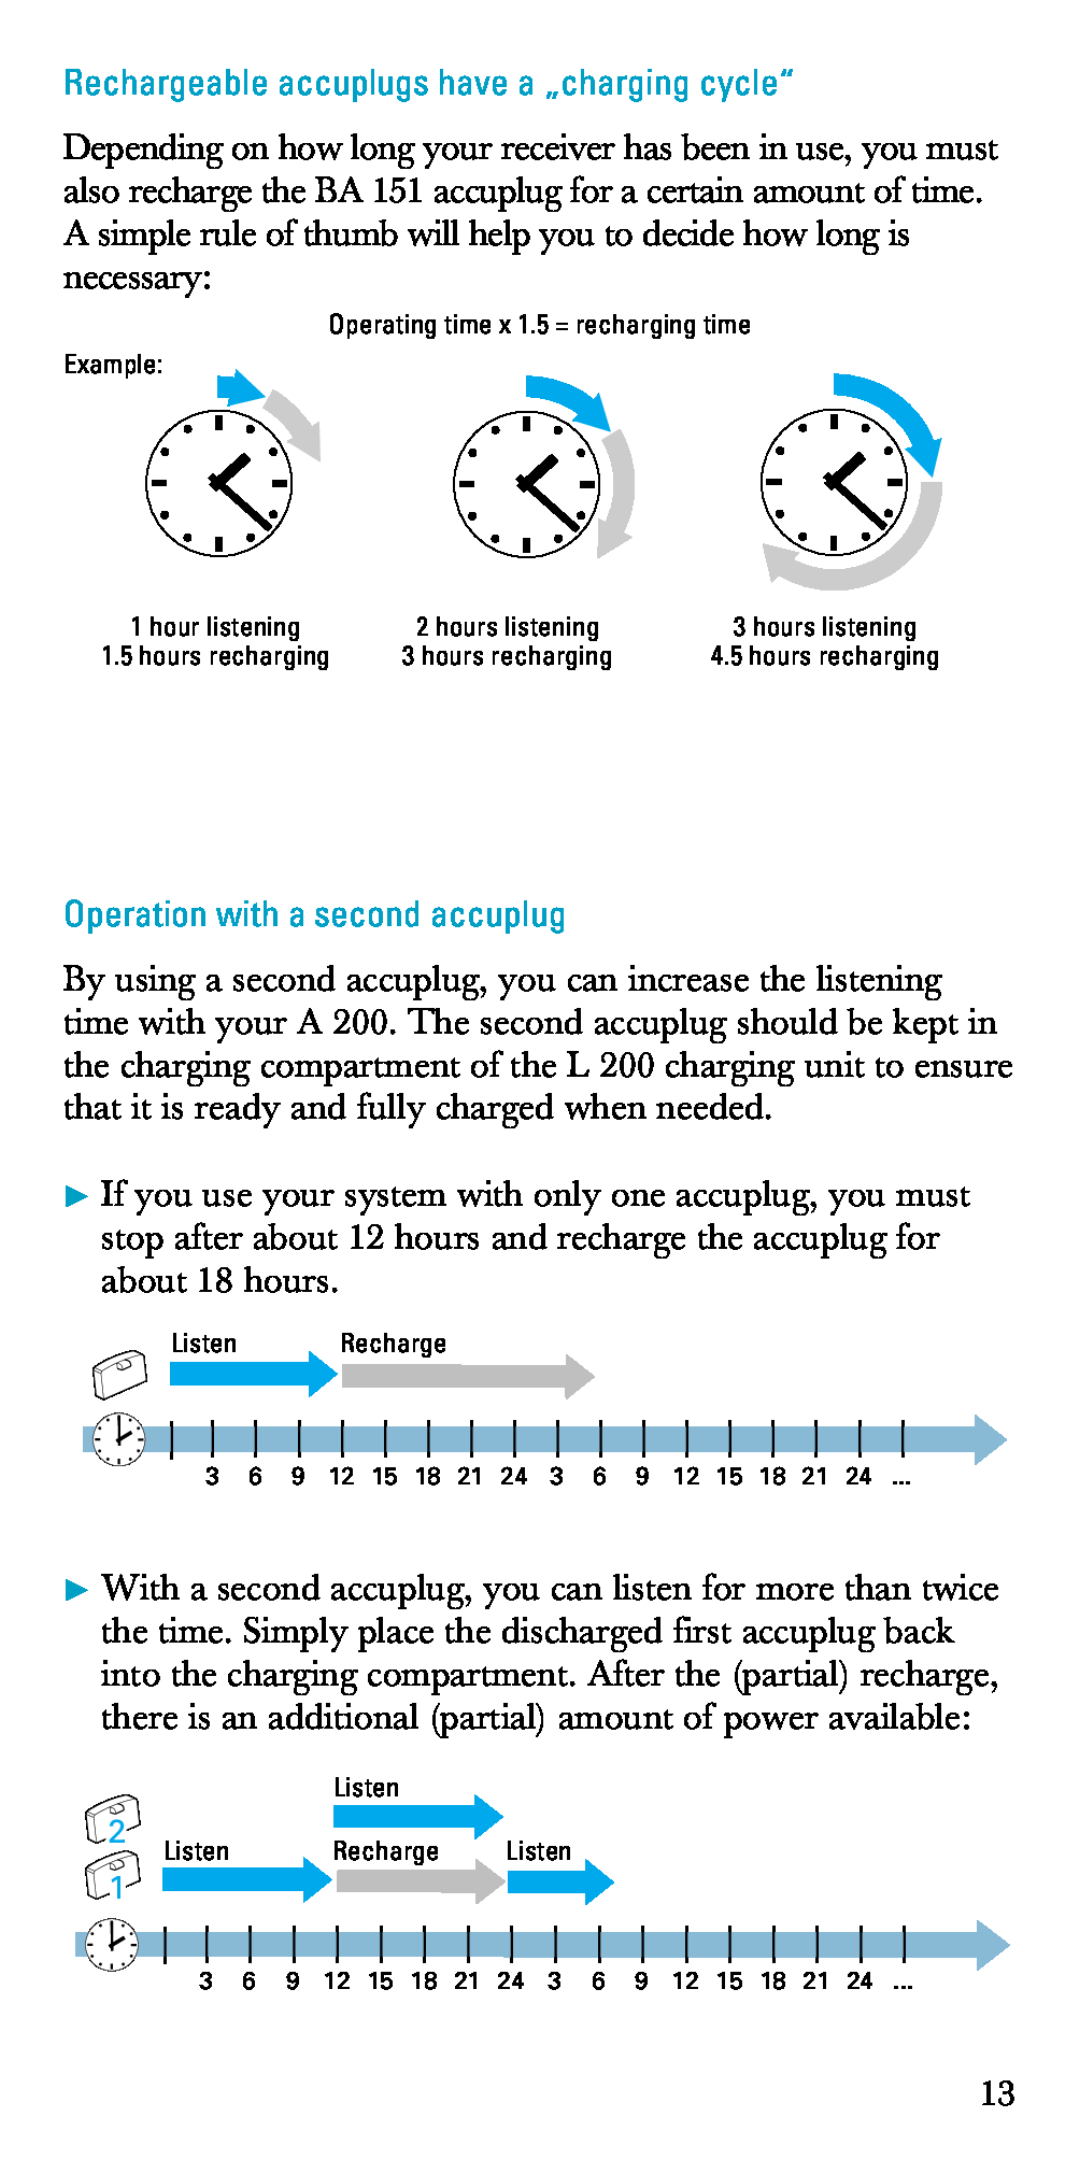 Sennheiser A200 manual Rechargeable accuplugs have a „charging cycle“, Operation with a second accuplug 